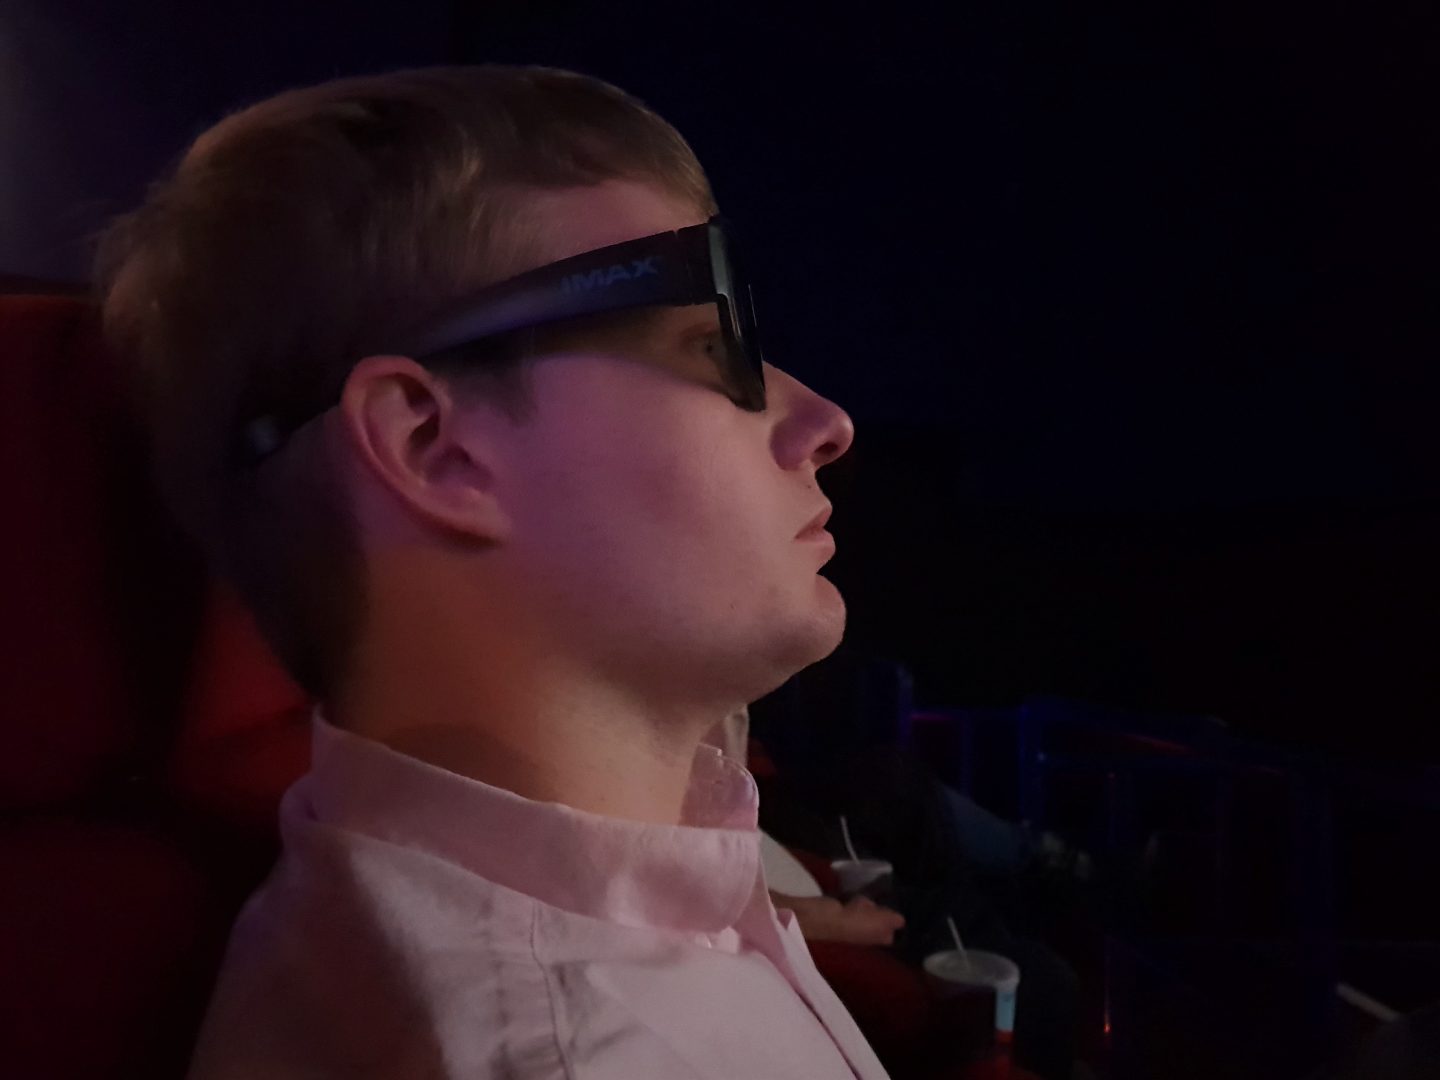 Watching Fantastic Beasts 2 The Crimes of Grindelwald through 3D IMAX glasses